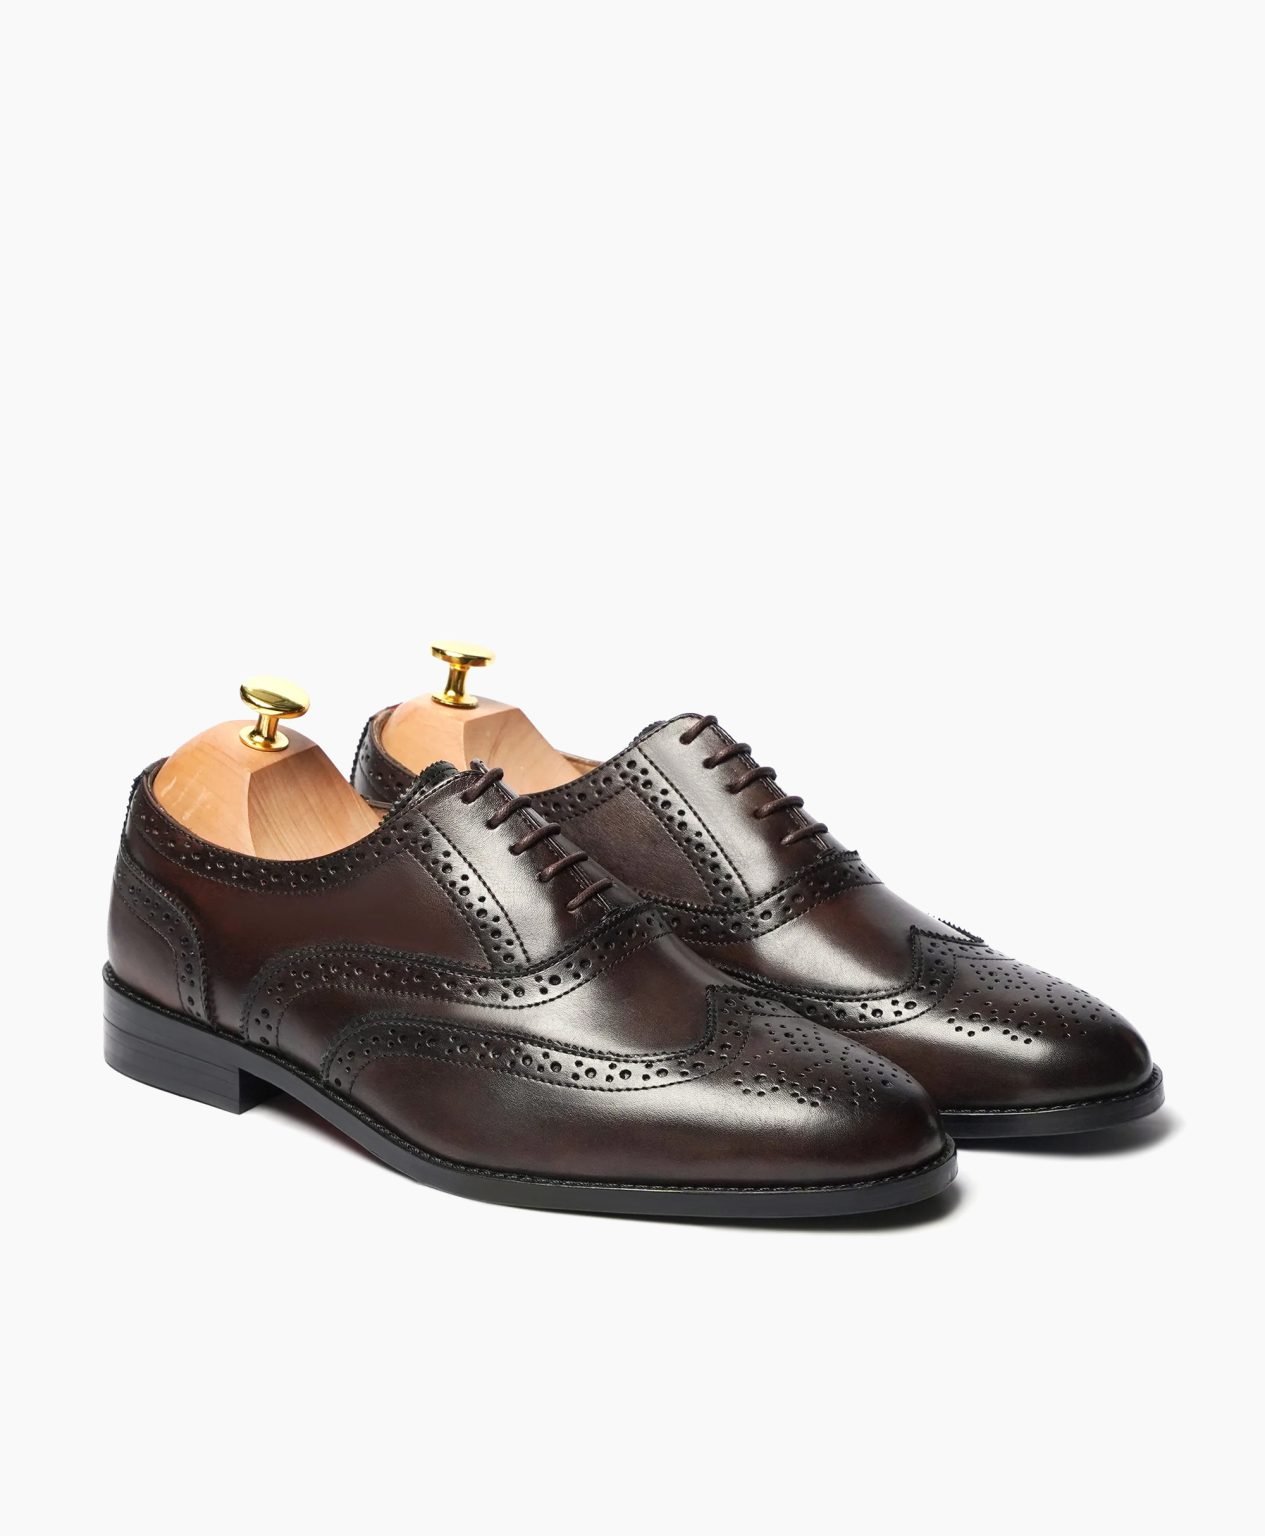 chiltern-oxford-dark-brown-leather-shoes-image200